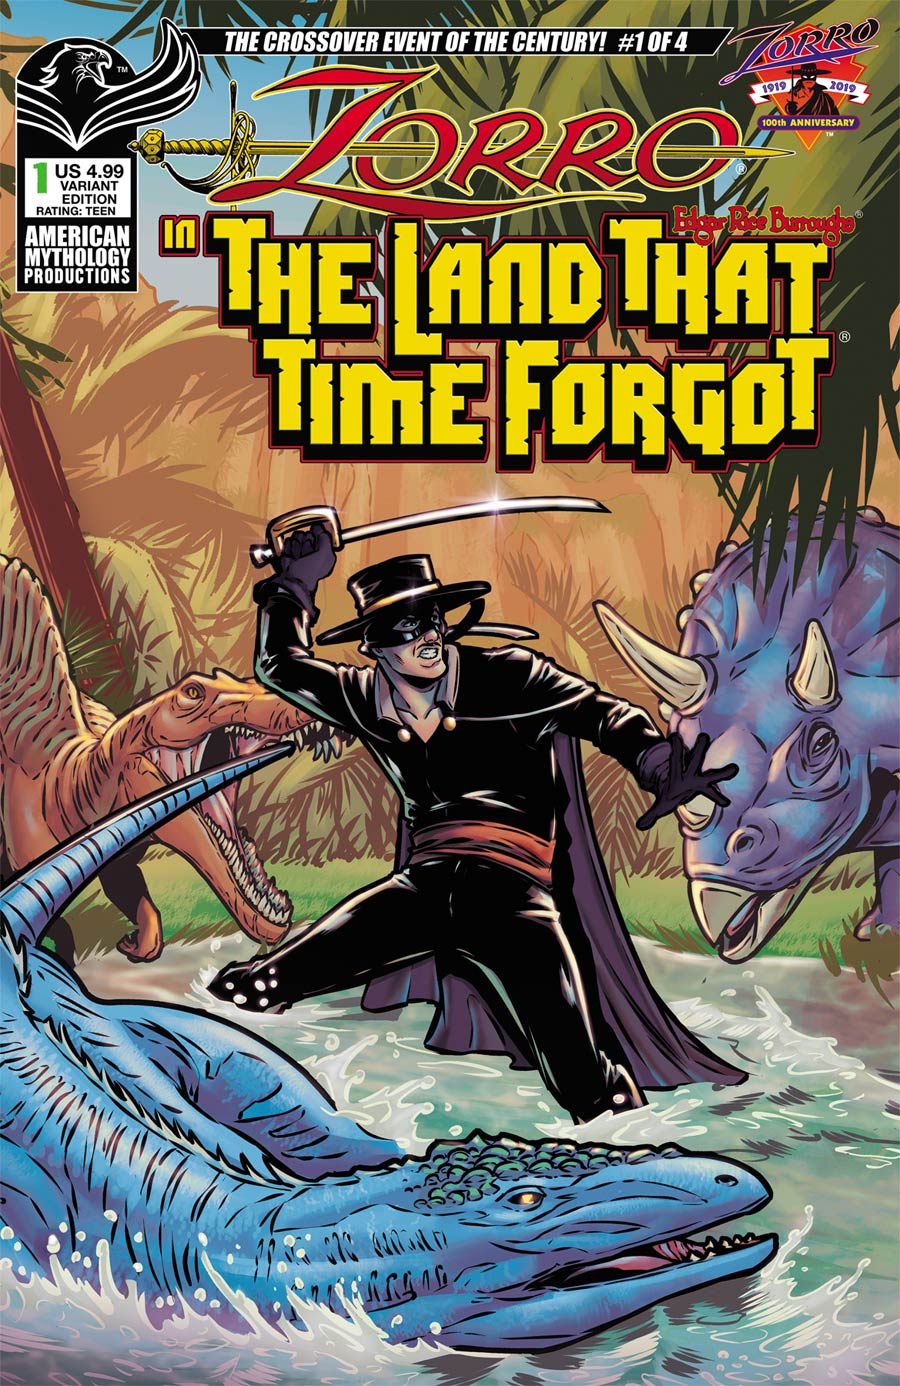 Zorro In The Land That Time Forgot #1 Cover B Variant Miriana Puglia Cover